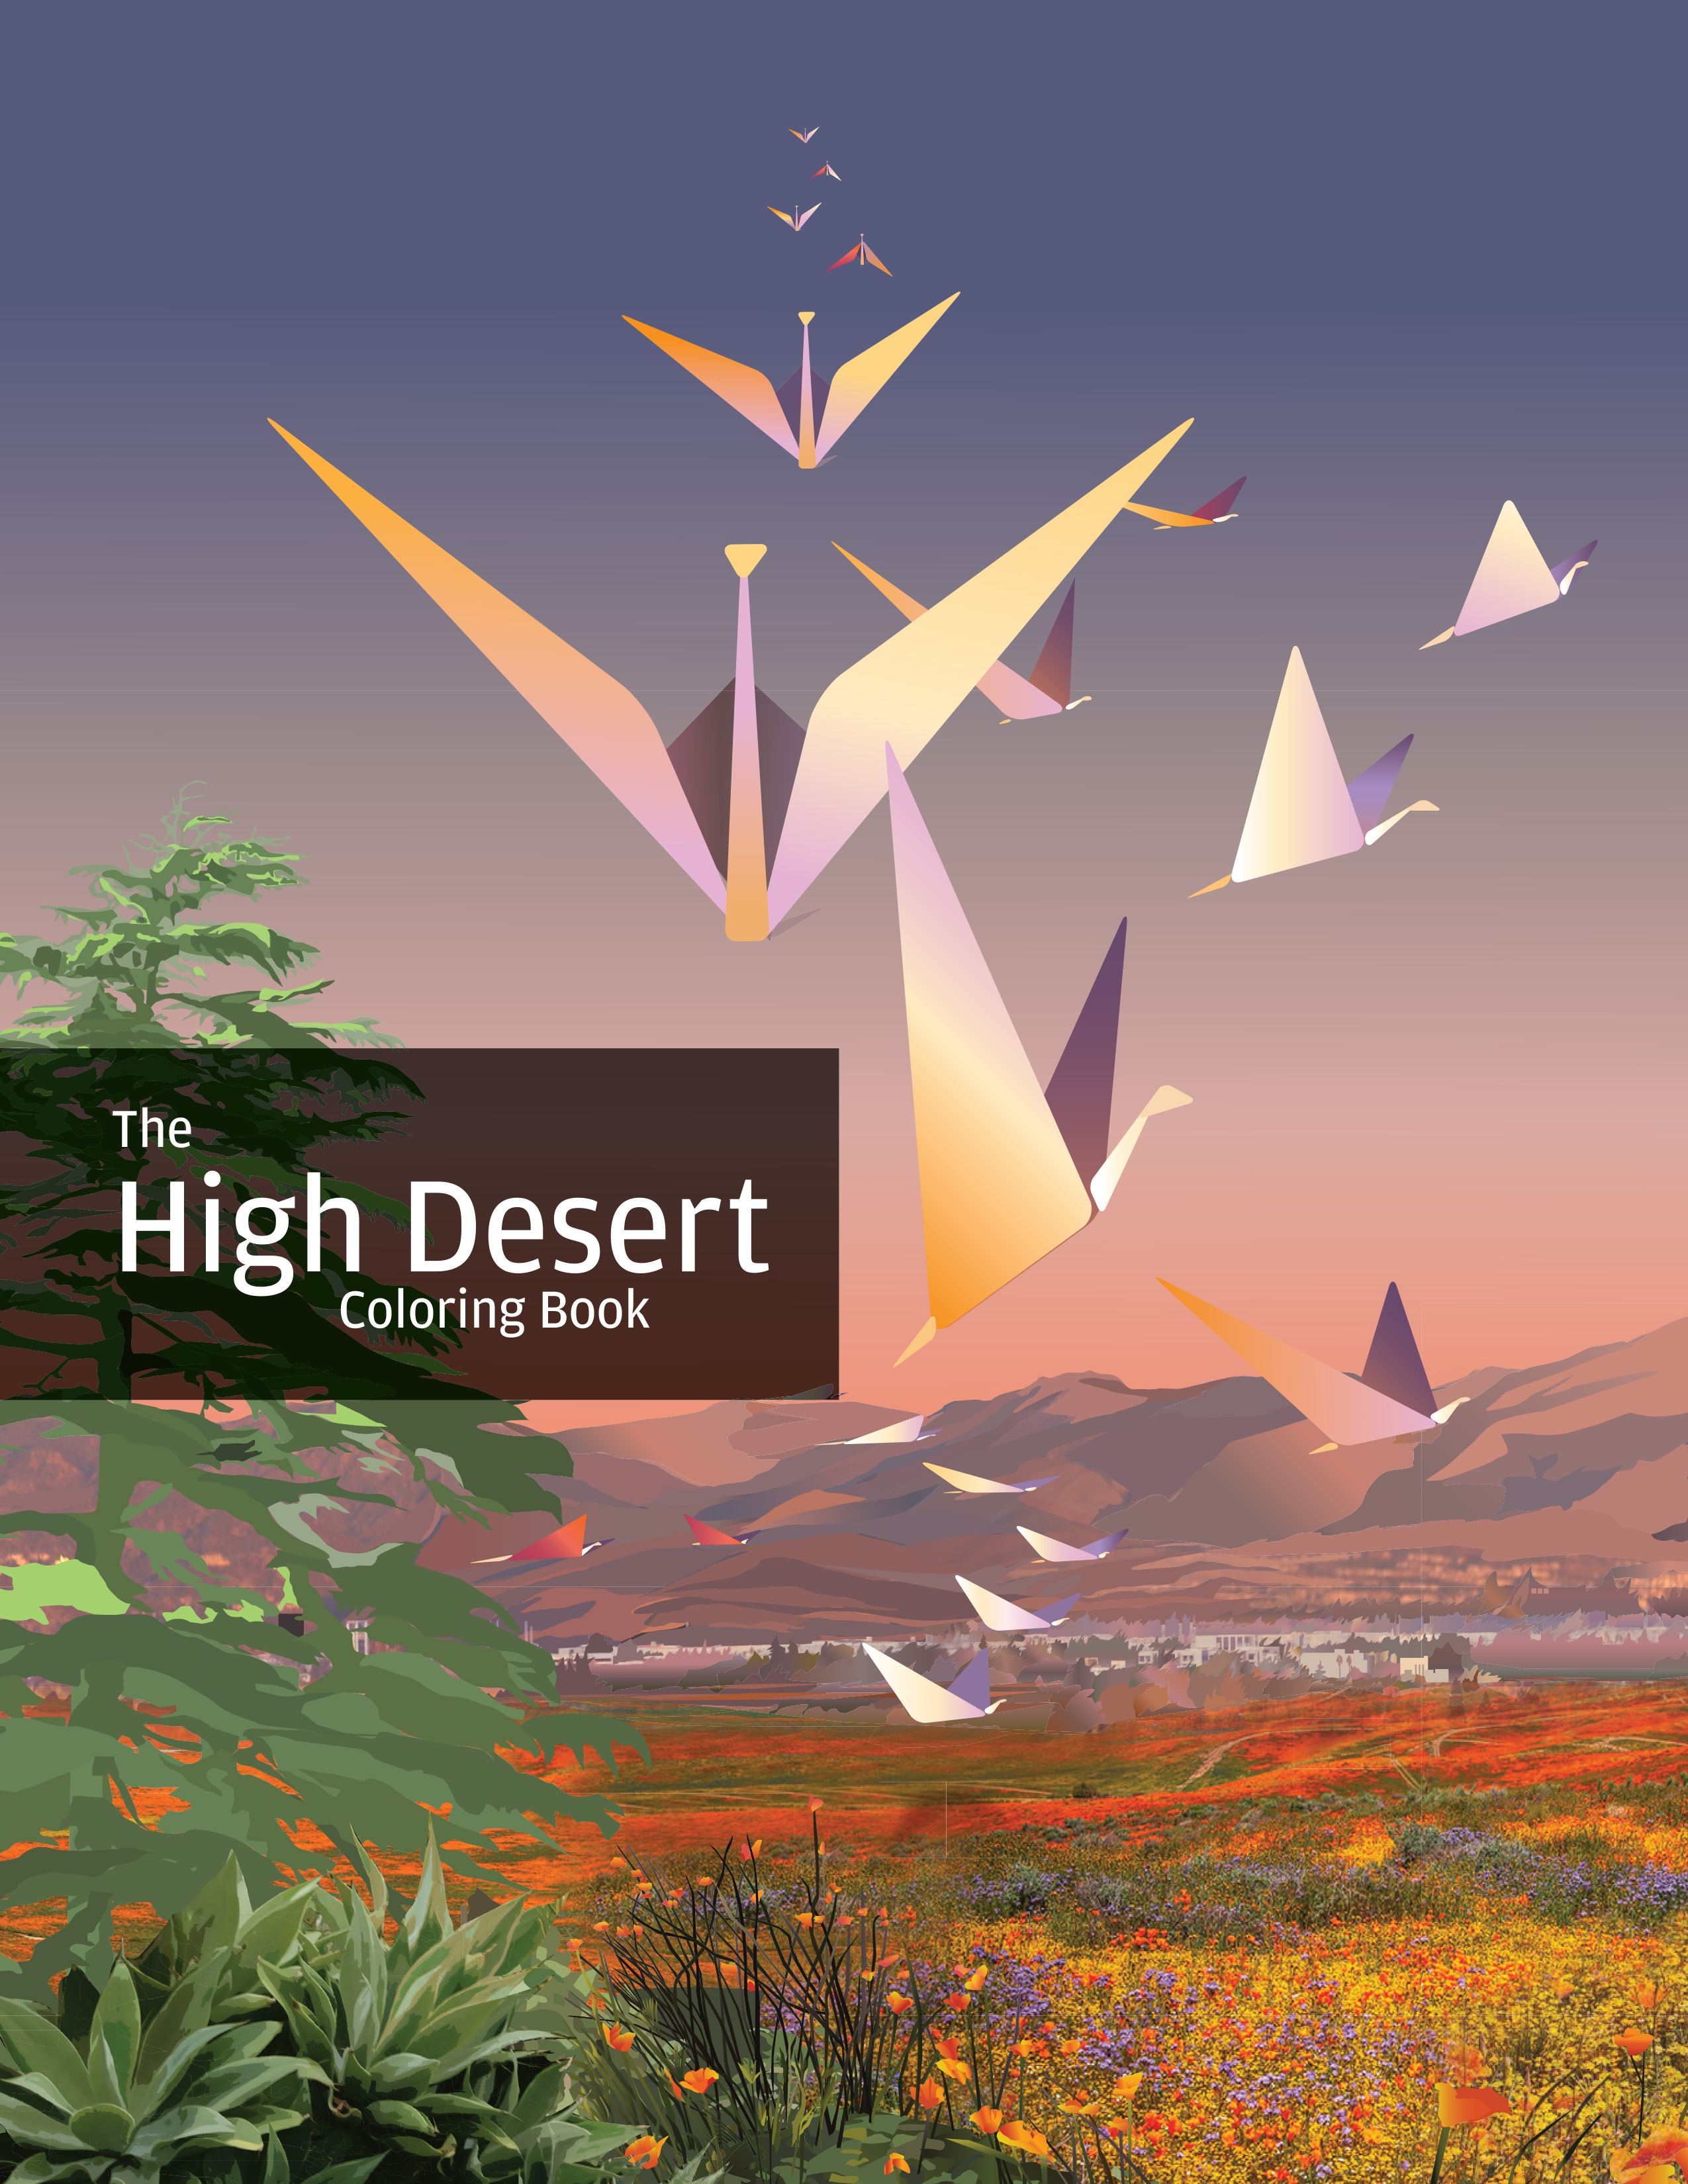 The High Desert Coloring Book by Renee Fox